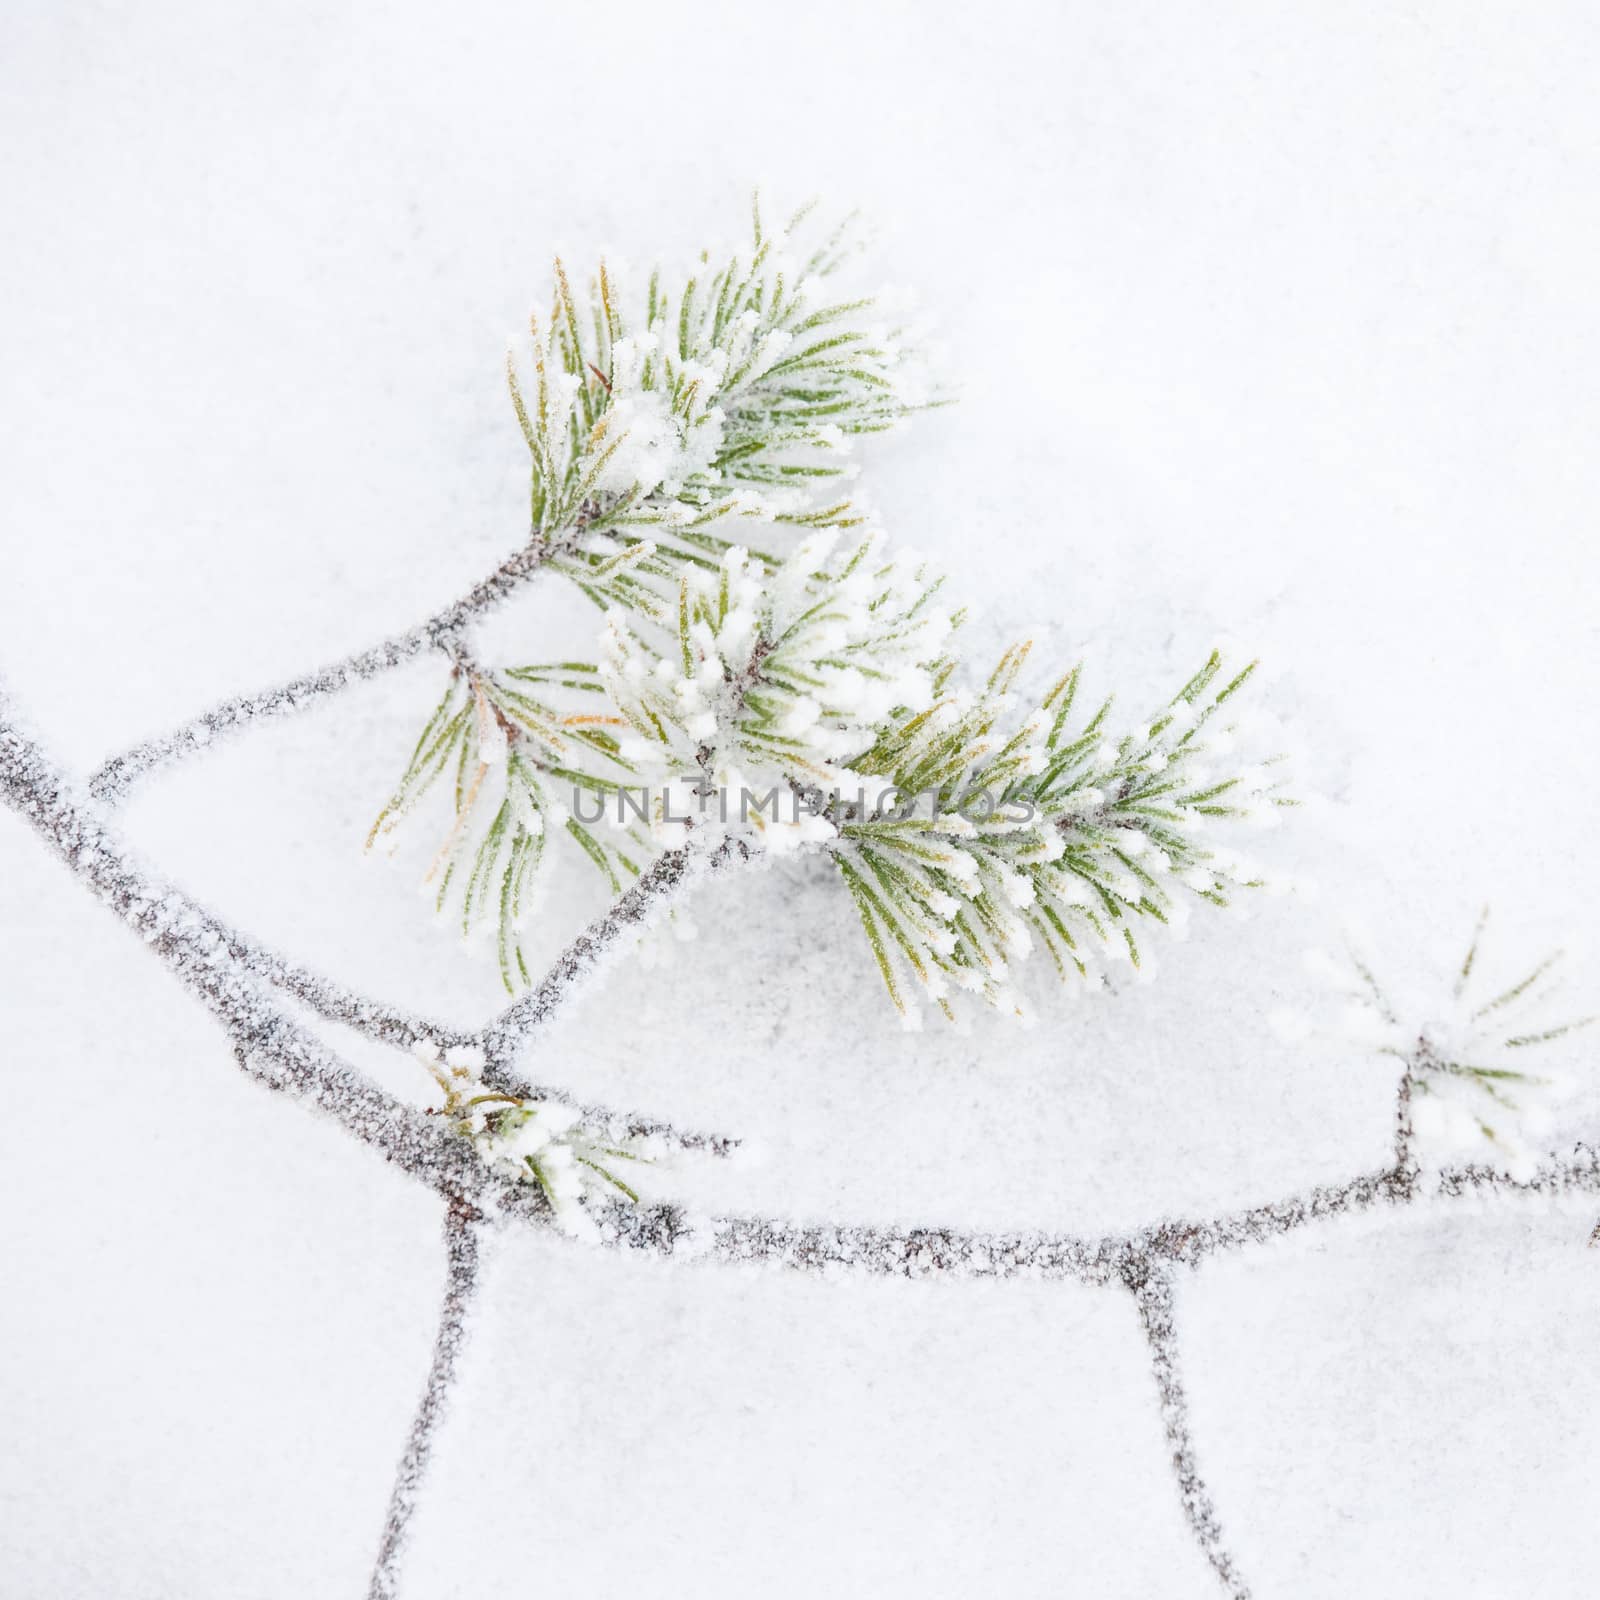 Frozen branch and snow background by juhku